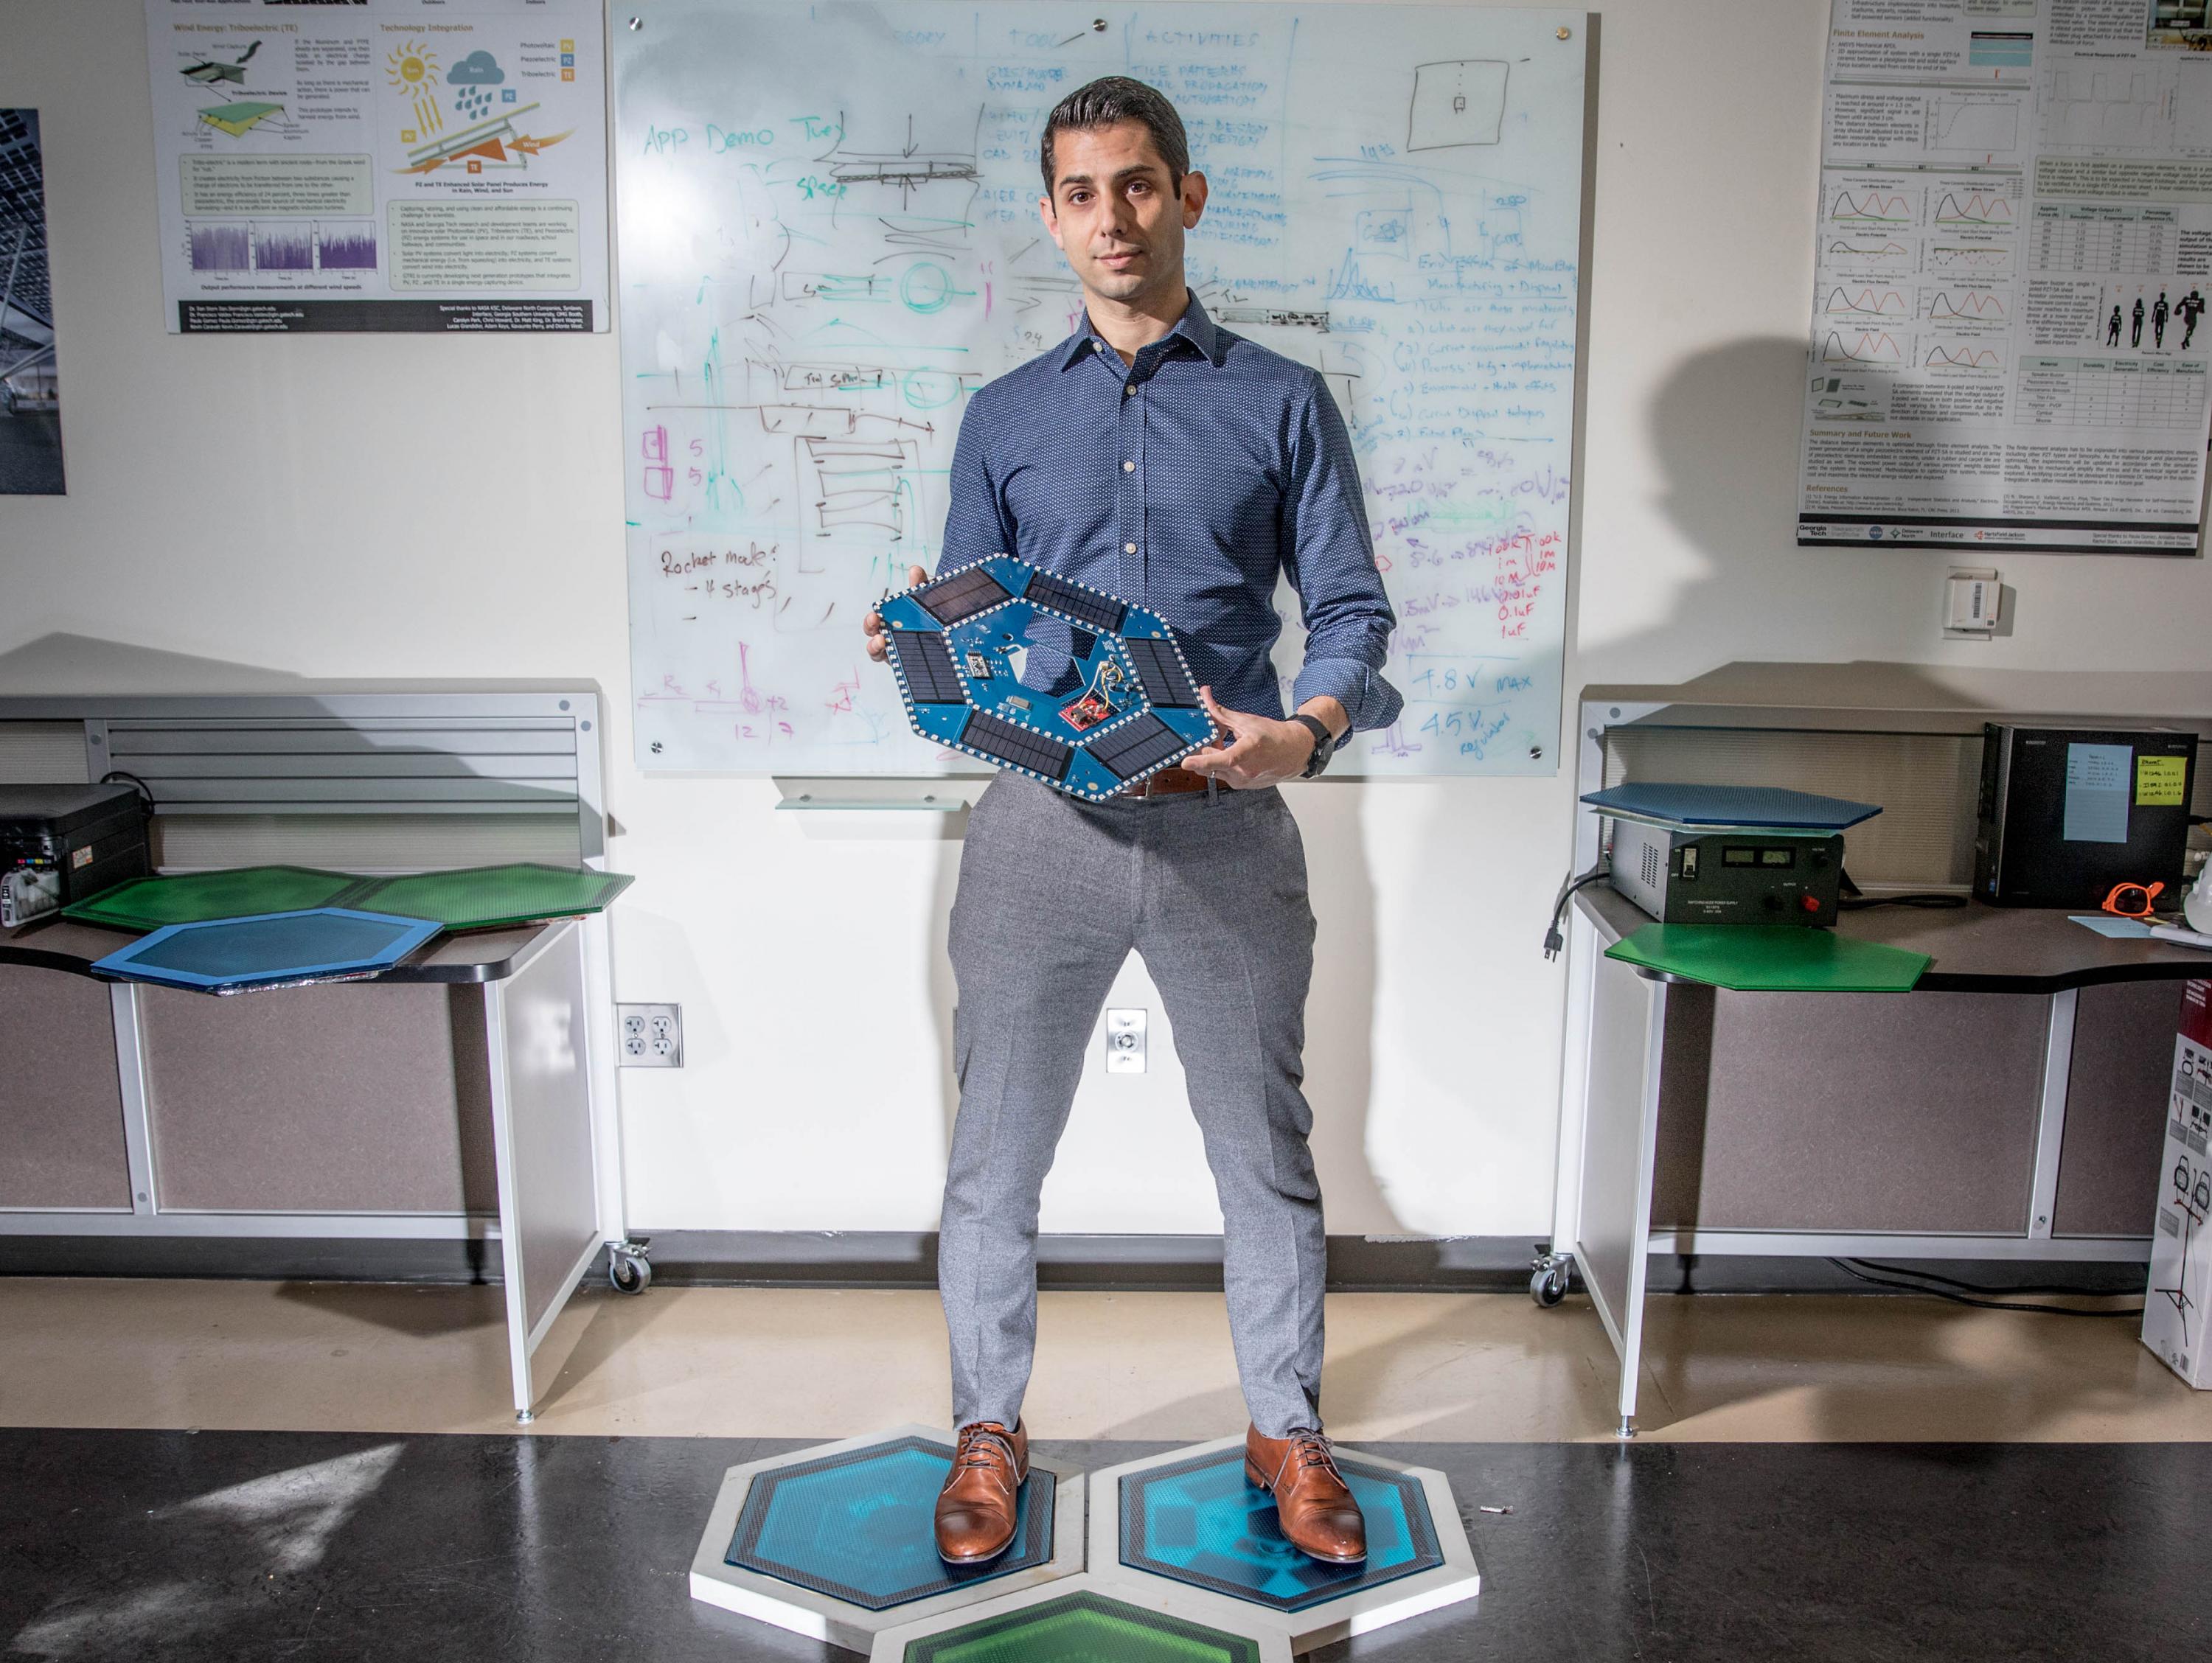 Ilan Stern, a GTRI senior research scientist, stands on piezoelectric tiles that will be used to create a lighted outdoor footpath at the NASA Kennedy Space Center’s Visitor Complex at Cape Canaveral, Florida. He’s holding the electronic components used in the tiles. (Credit: Branden Camp, Georgia Tech)